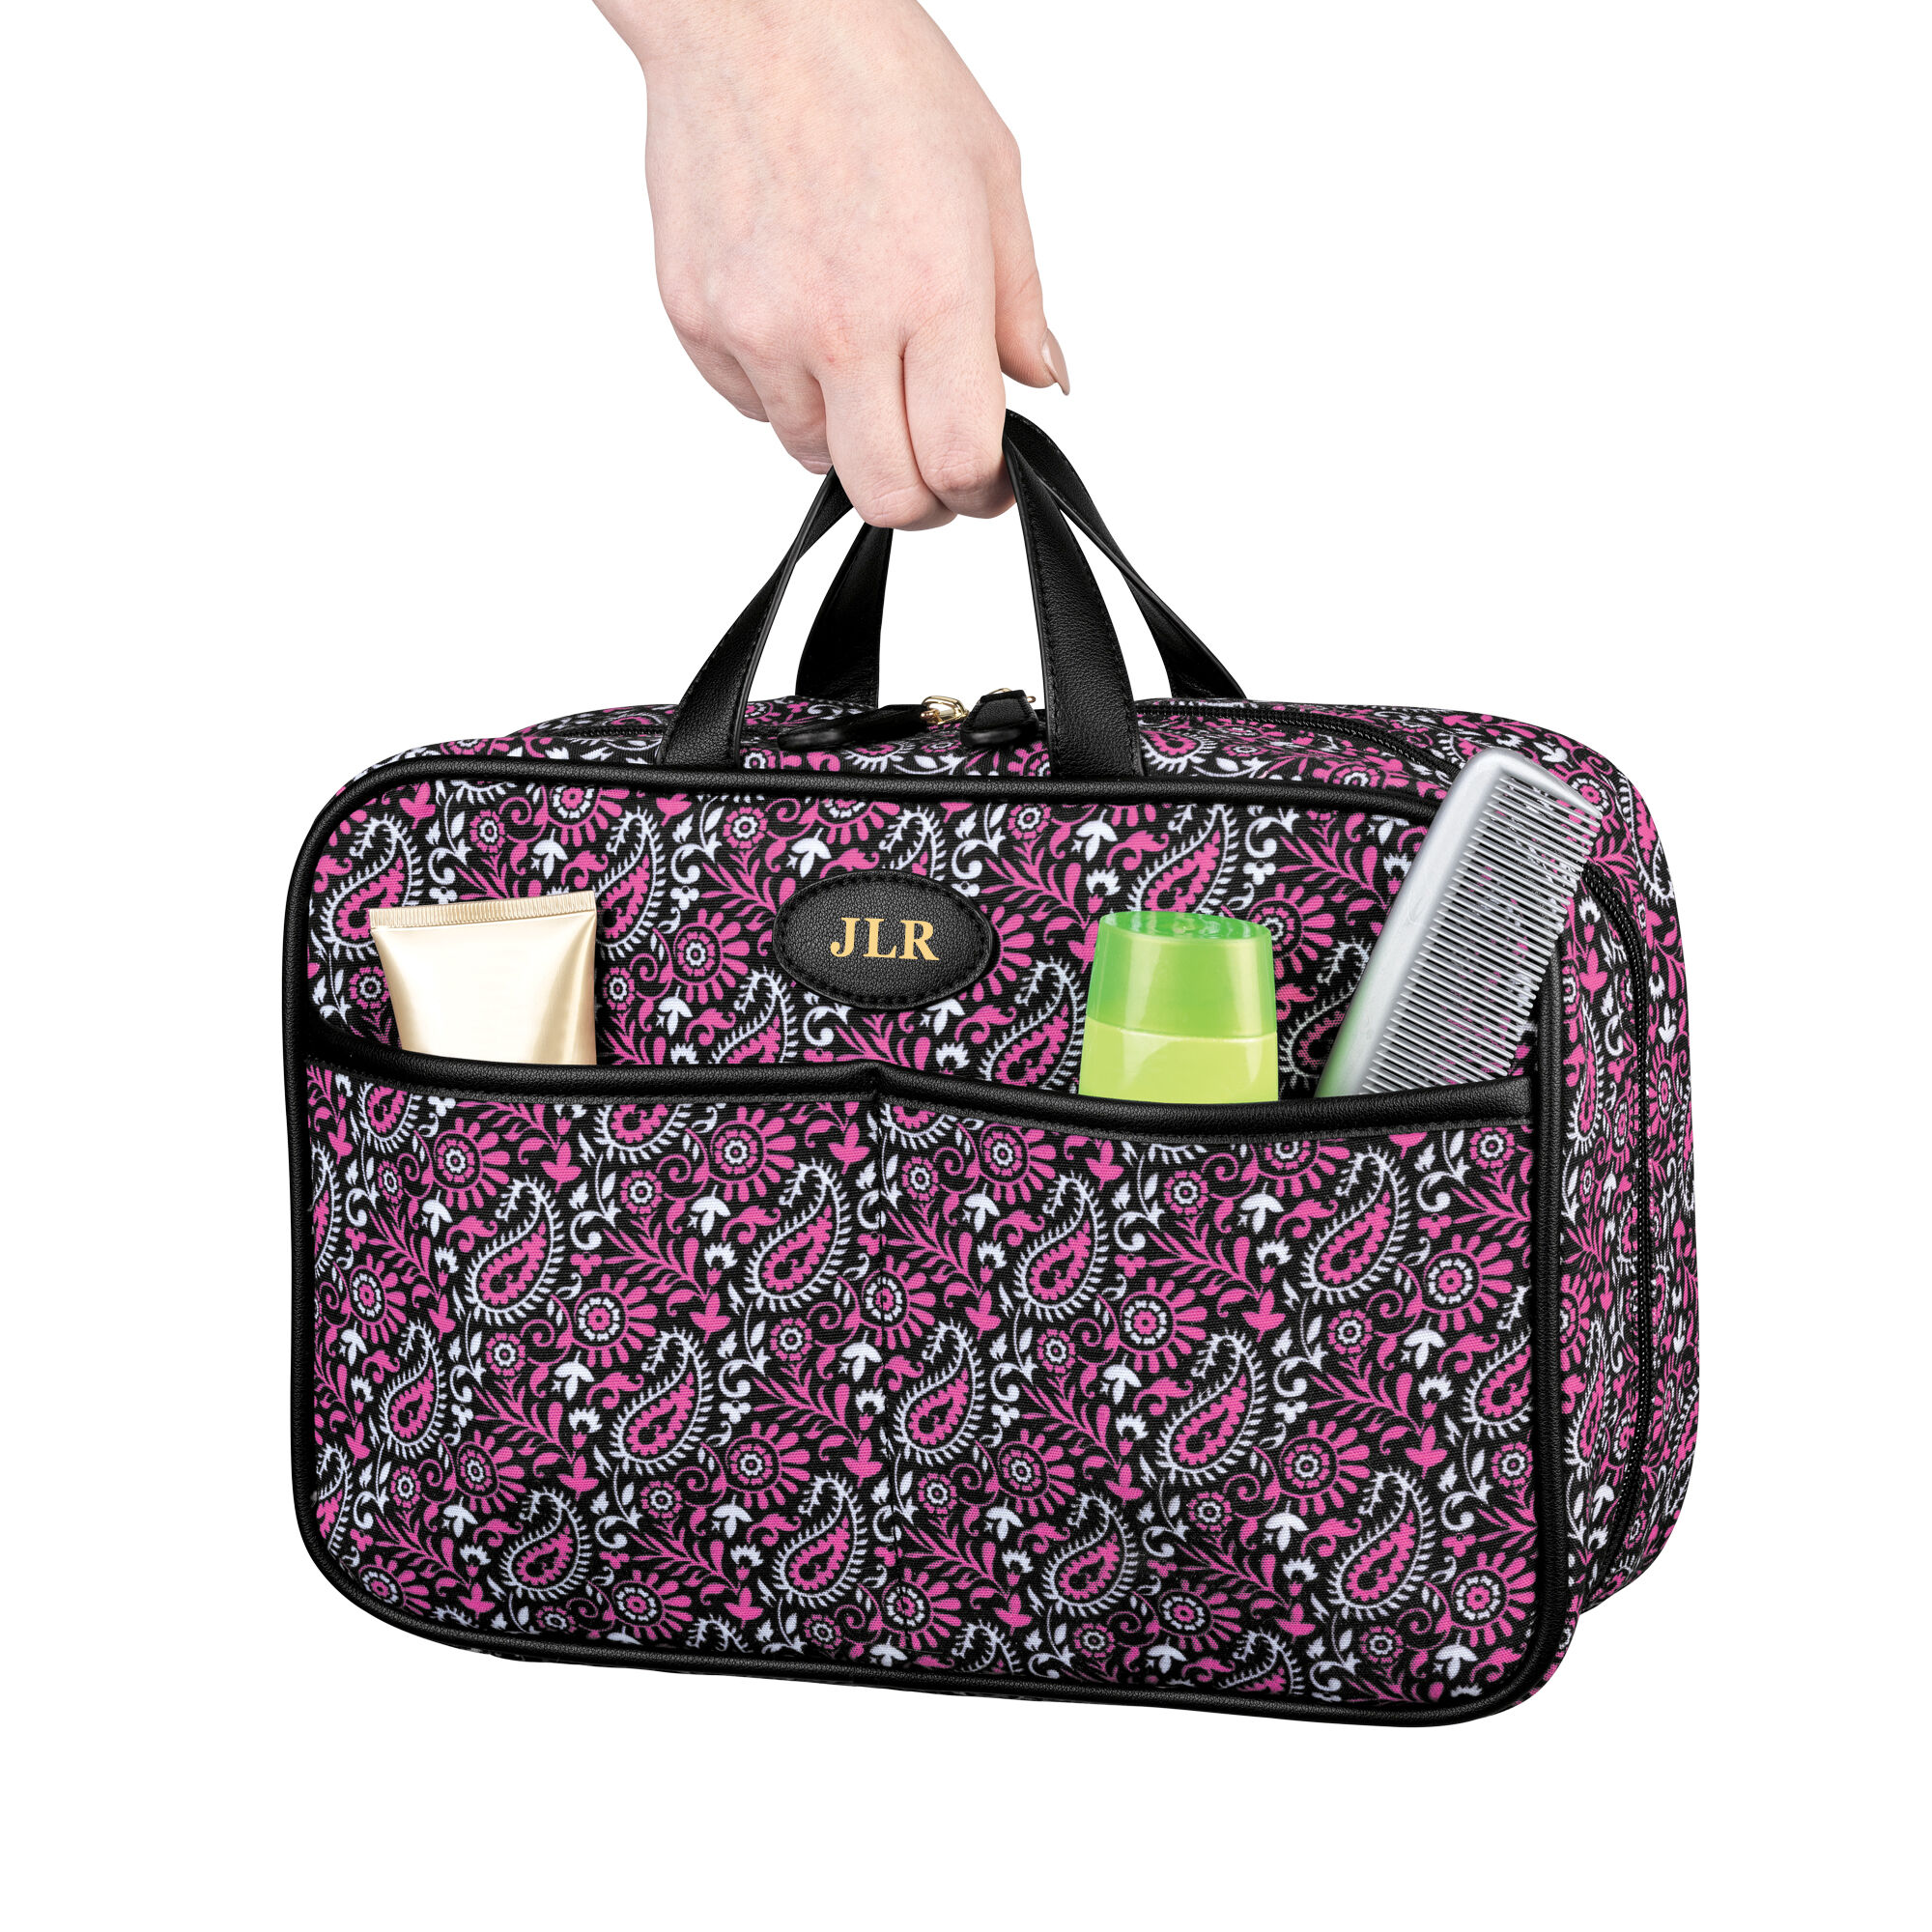 The Personalized Ultimate Travel Set 5548 0016 e side